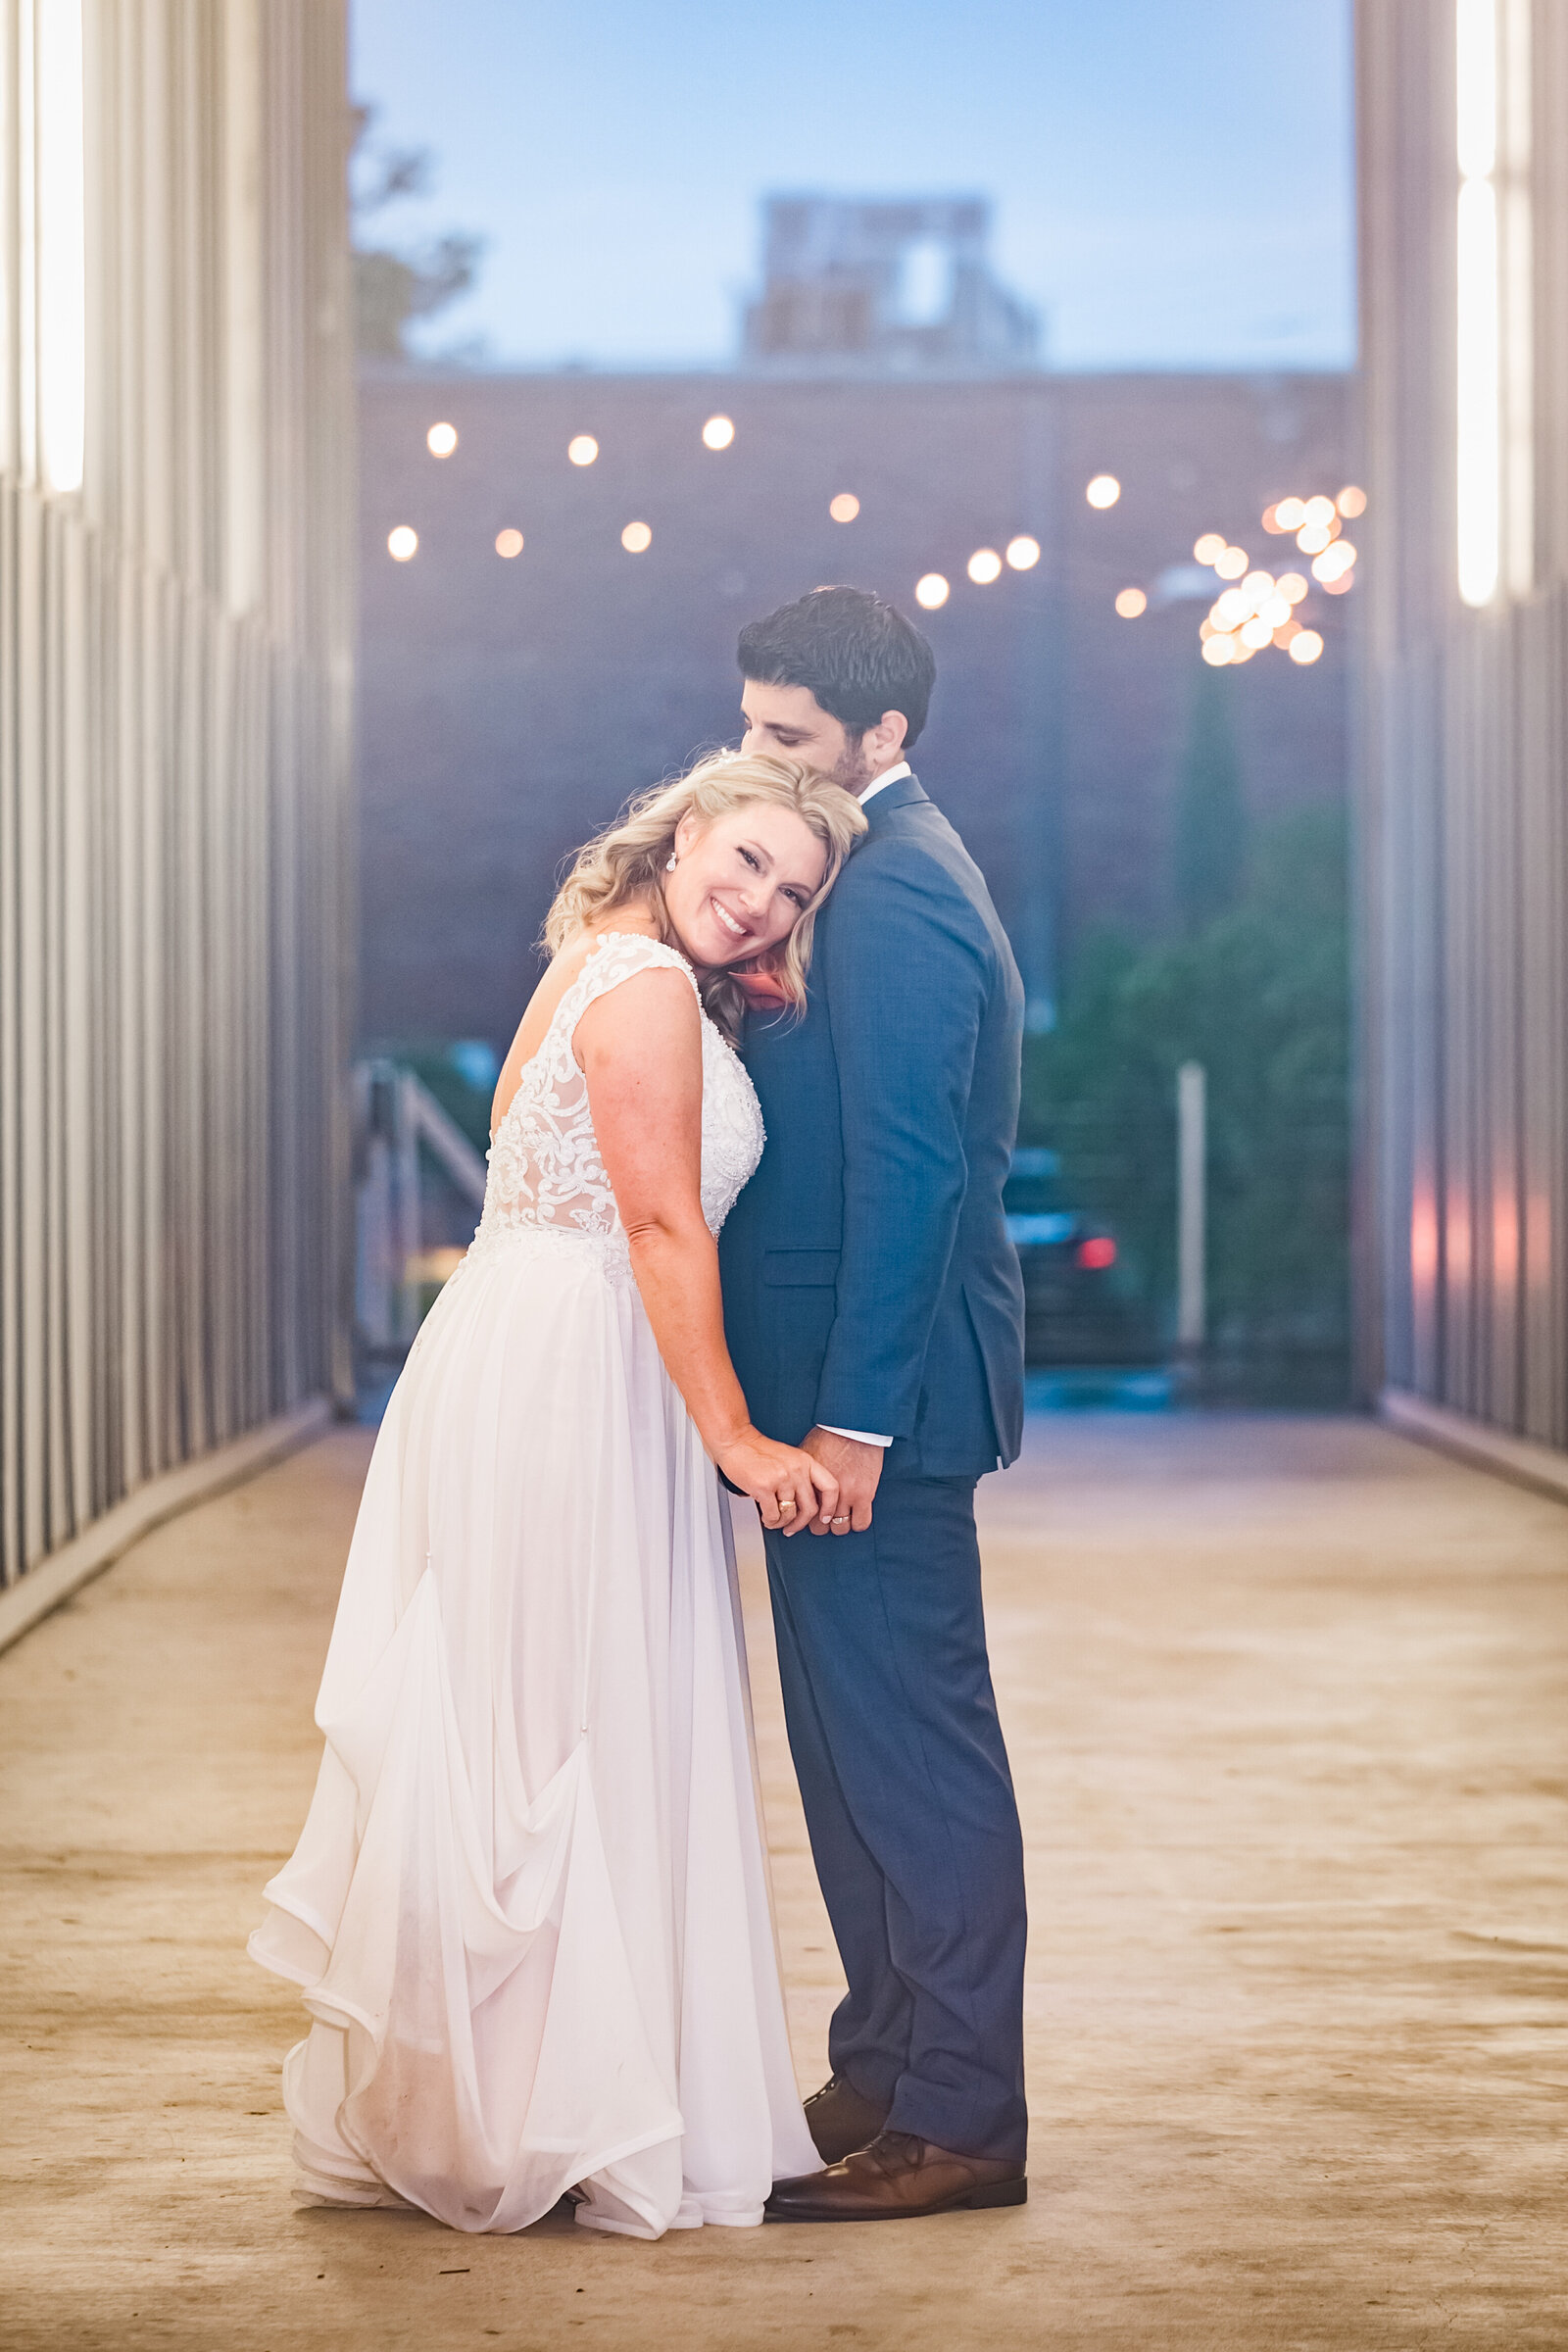 Austin Family Photographer, Tiffany Chapman Photography bride and groom in a tunnel photo